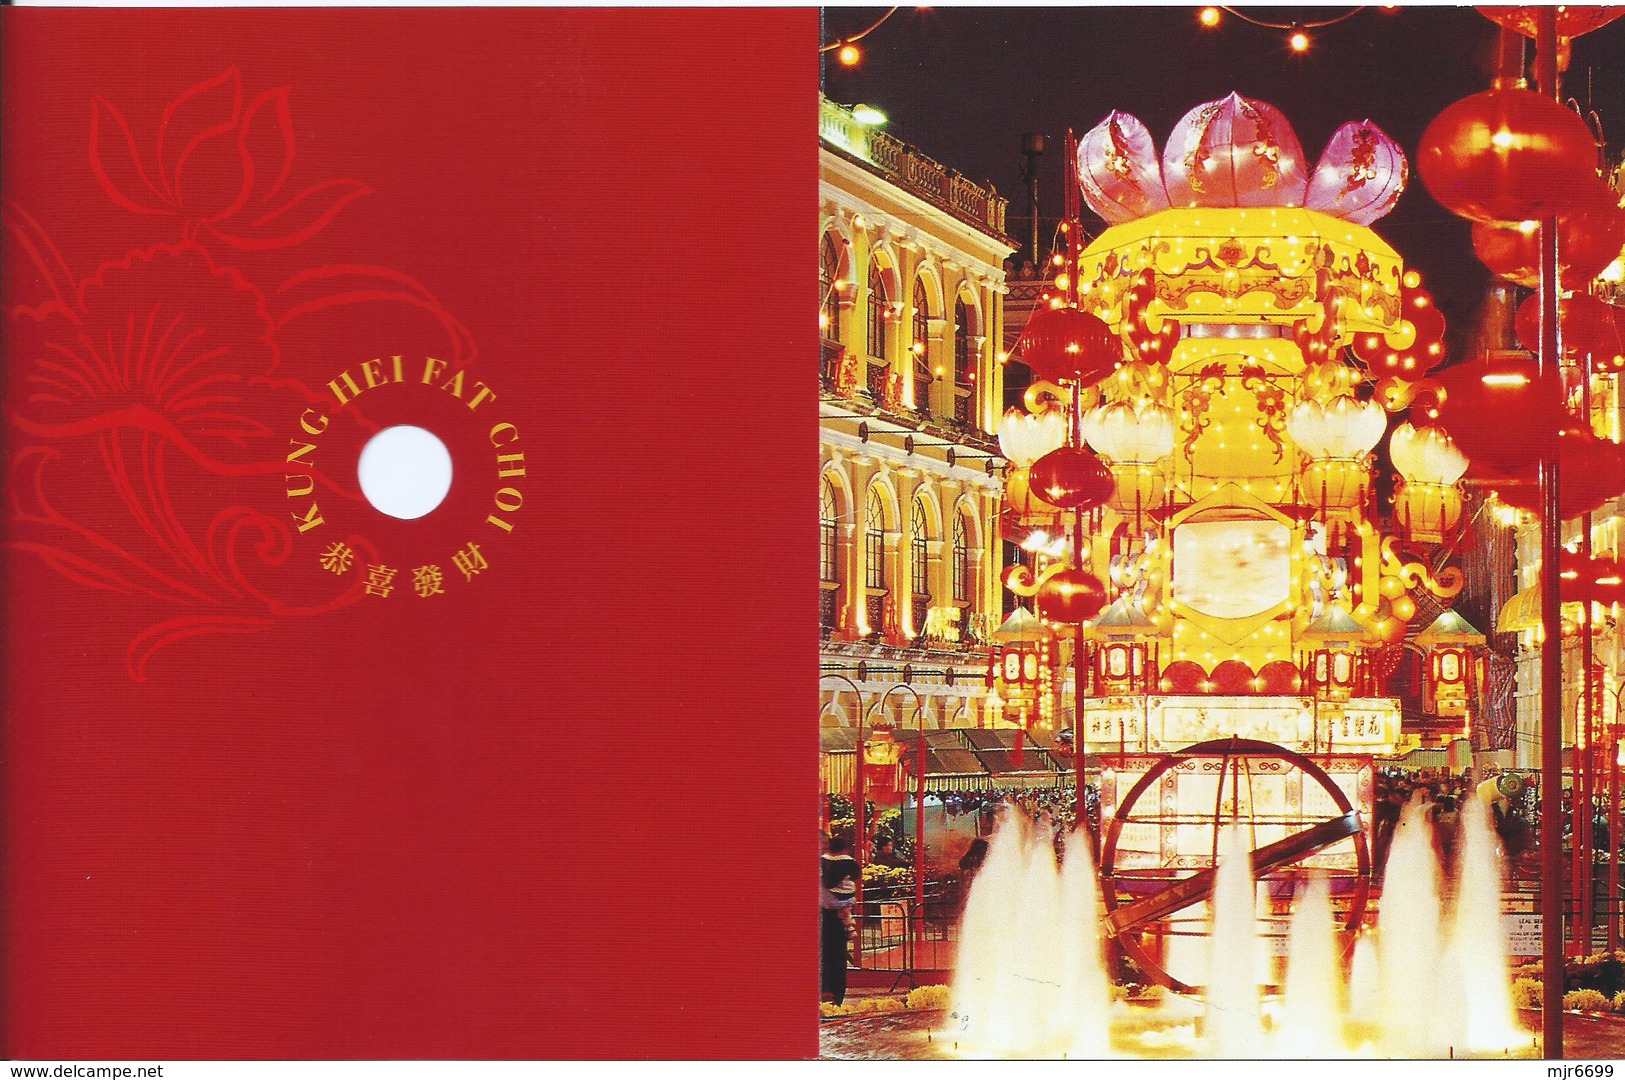 MACAU 1999 NEW YEAR GREETING CARD & POSTAGE PAID COVER, POST OFFICE CODE #BPK005 - Postal Stationery